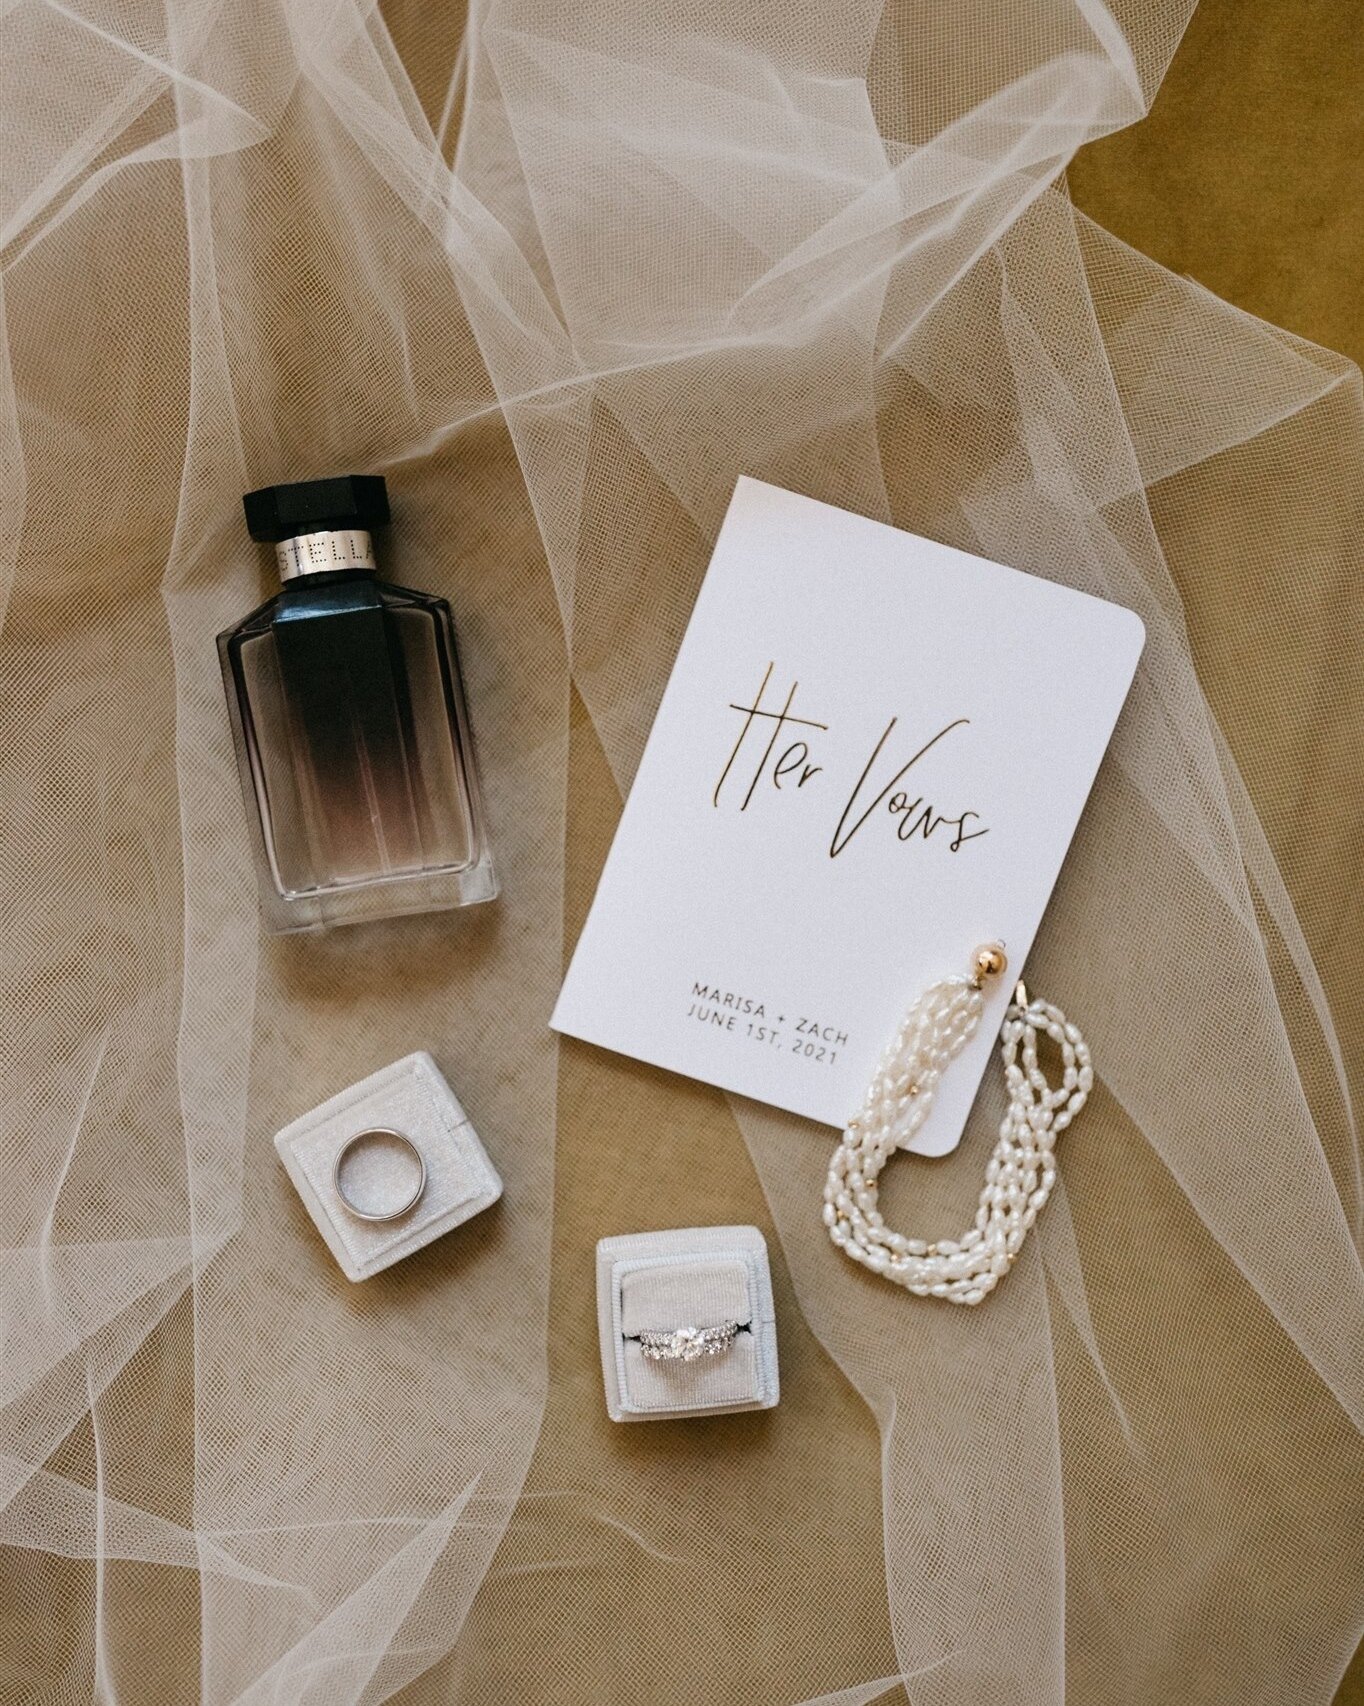 Cue the cute Mrs. ring box, vow book keepsakes, and family heirloom jewelry. What special little details are you including on your wedding day?